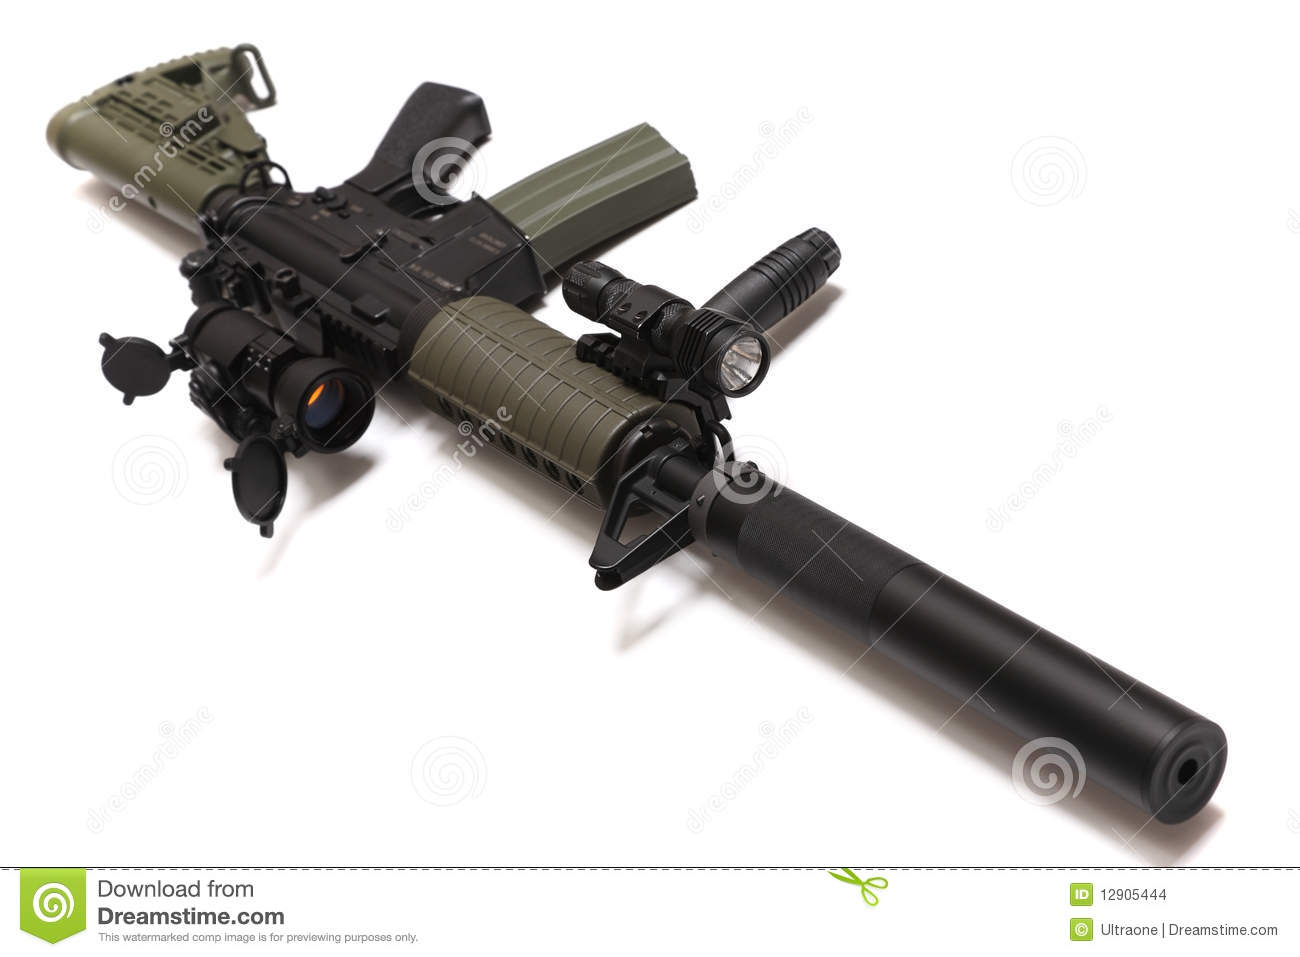 Us Spec Ops M4a1 Custom Assault Rifle  Stock Images   Image  12905444